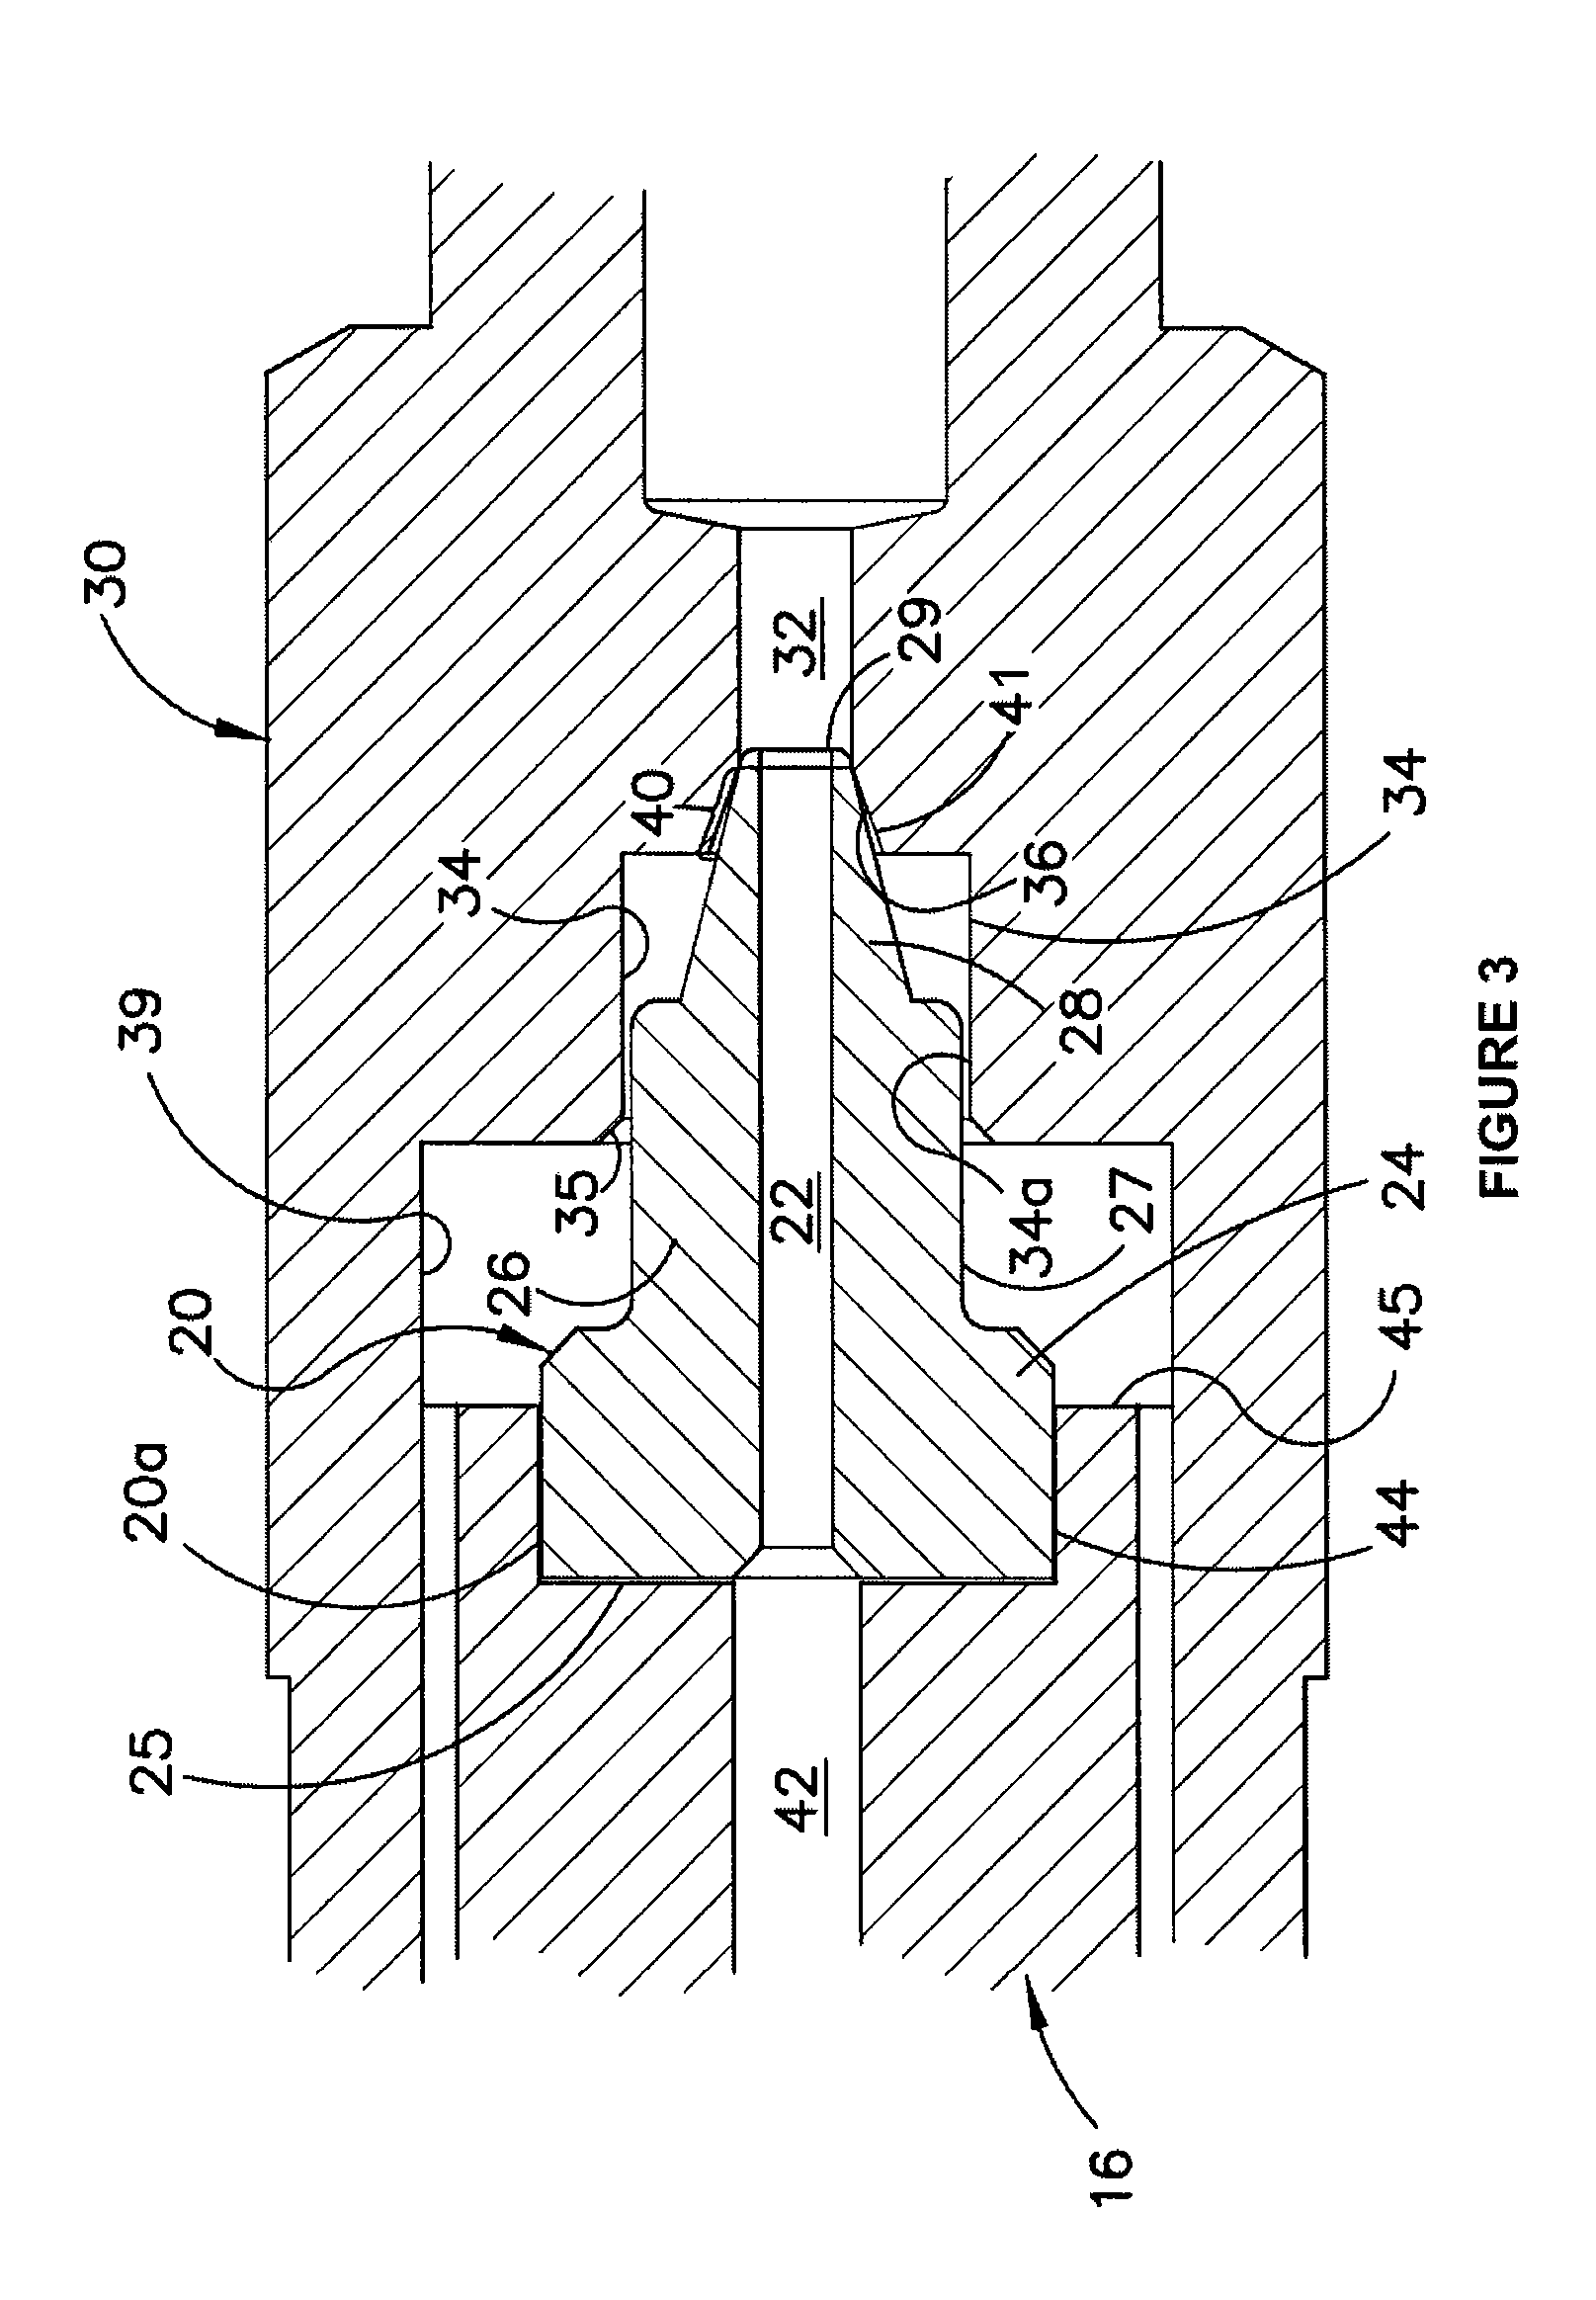 Ferrule for making fingertight column connections in gas chromatography